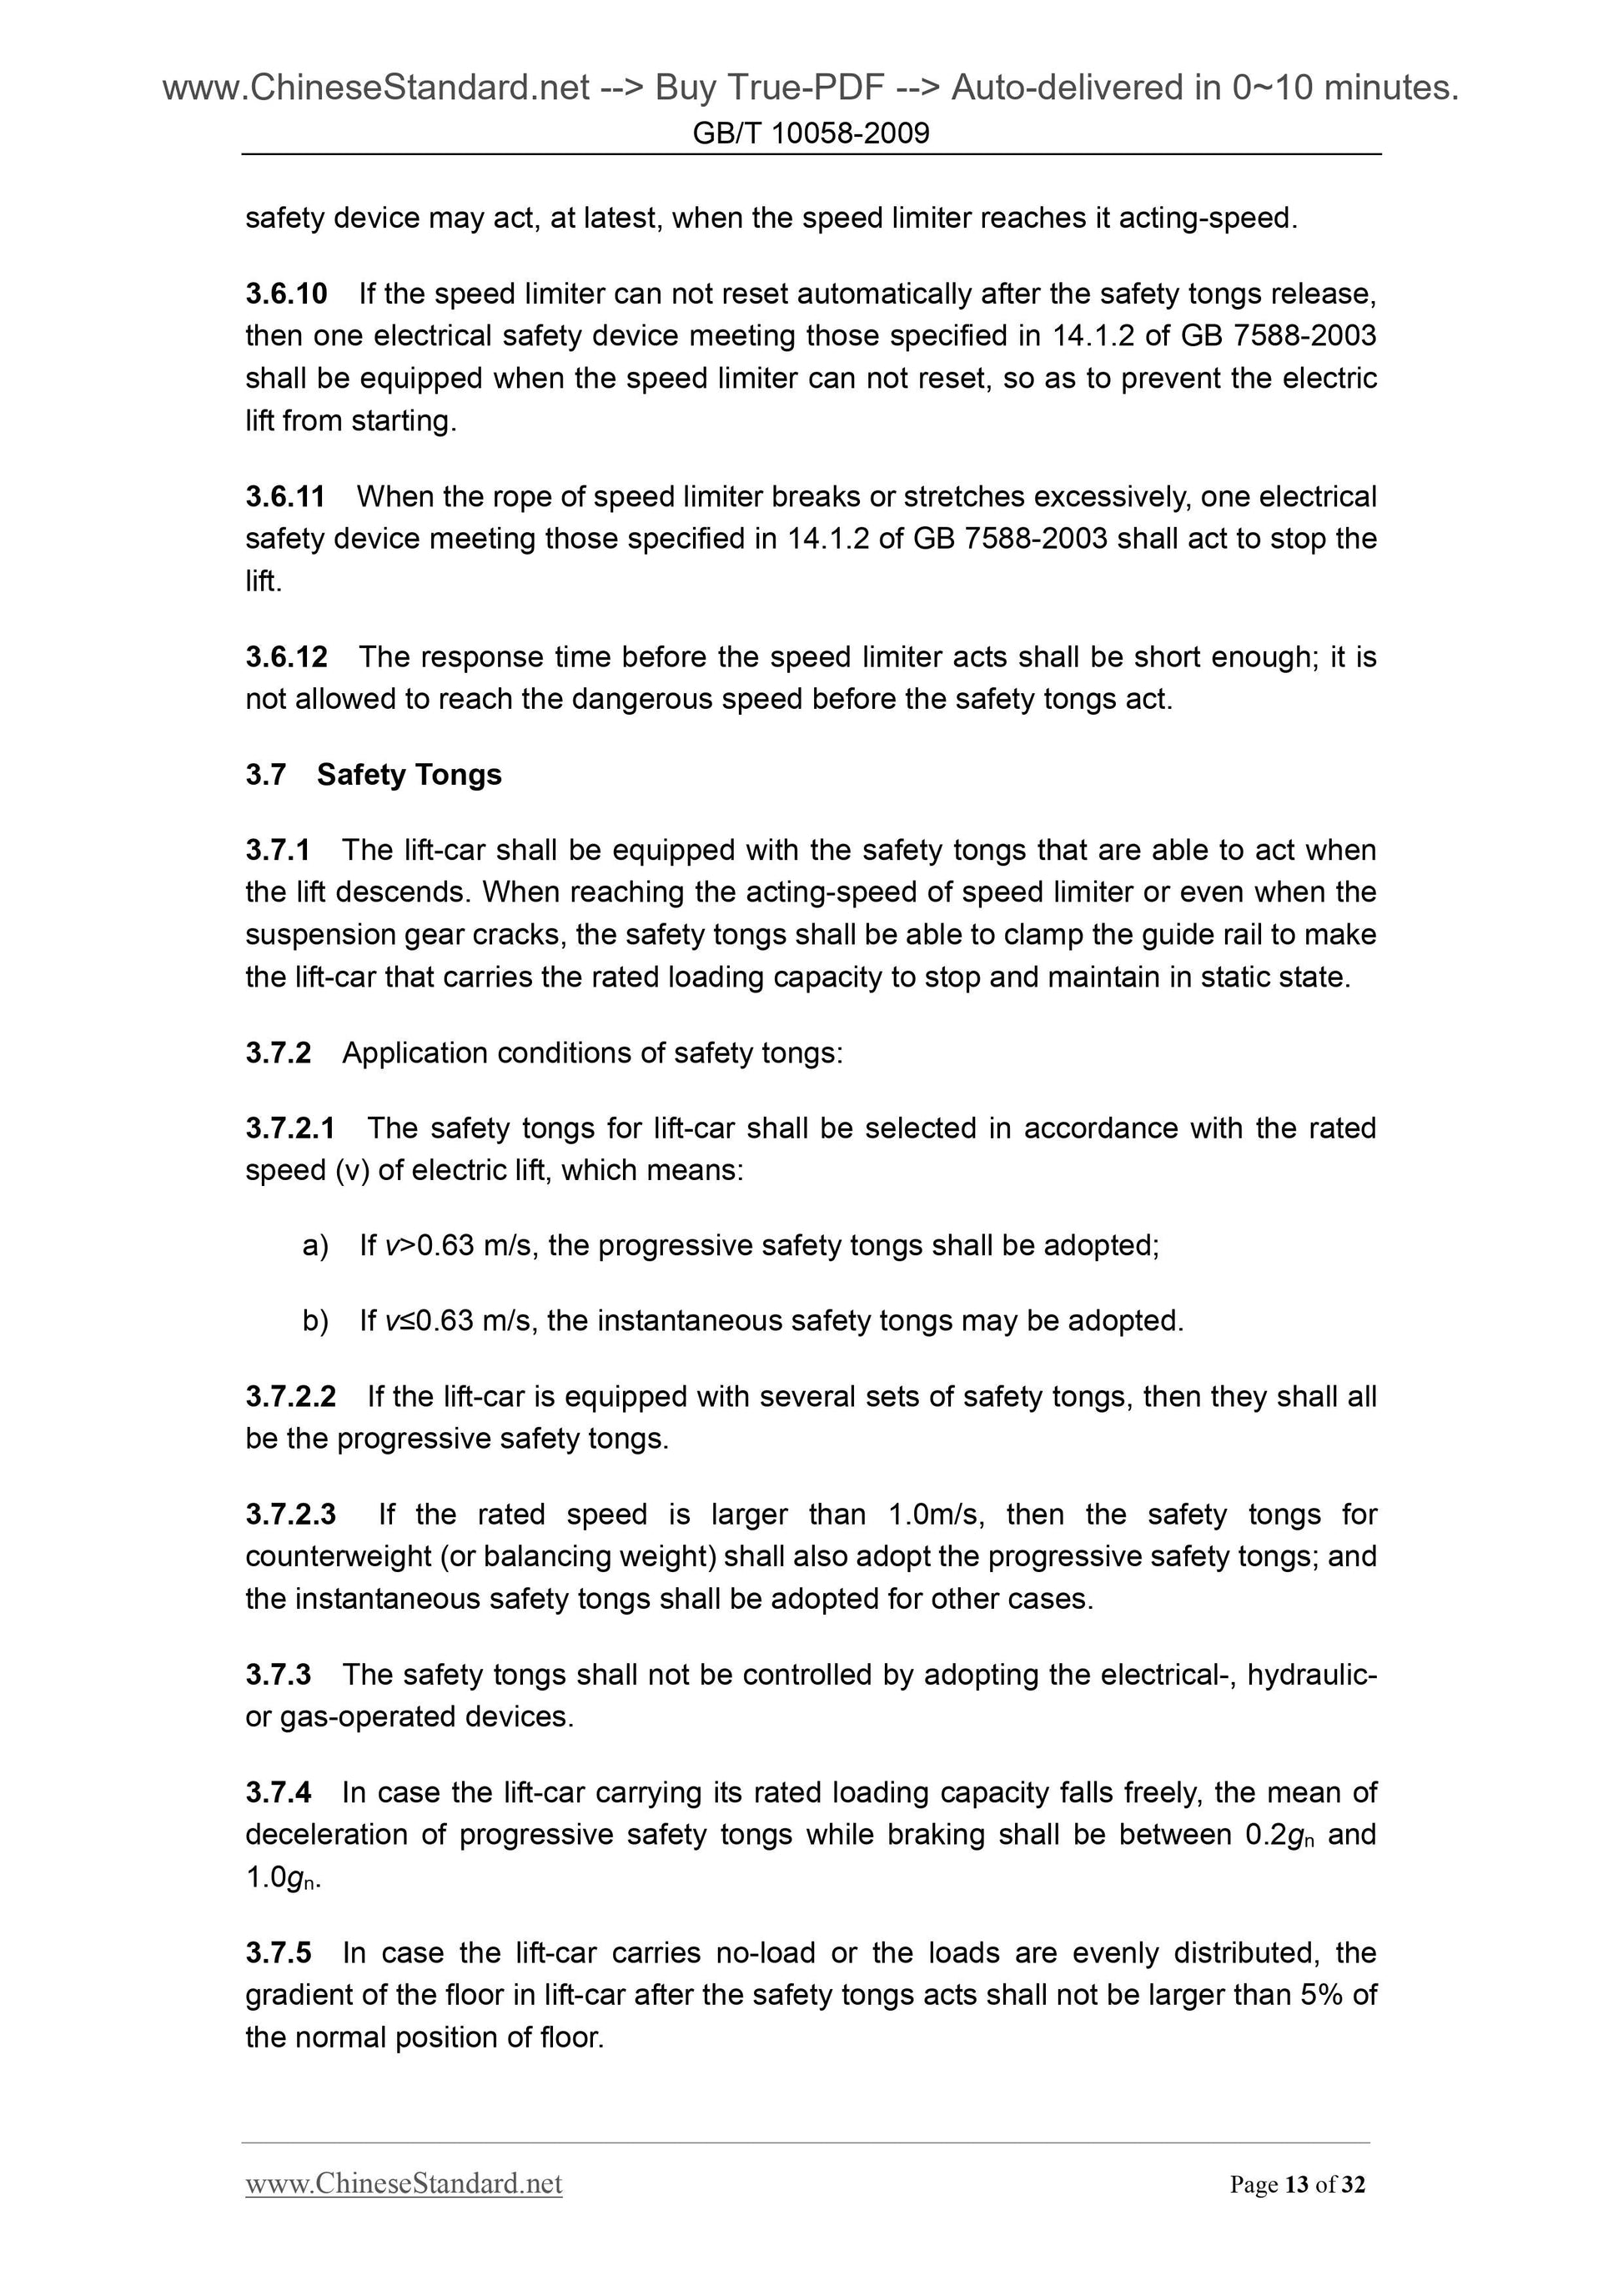 GB/T 10058-2009 Page 8